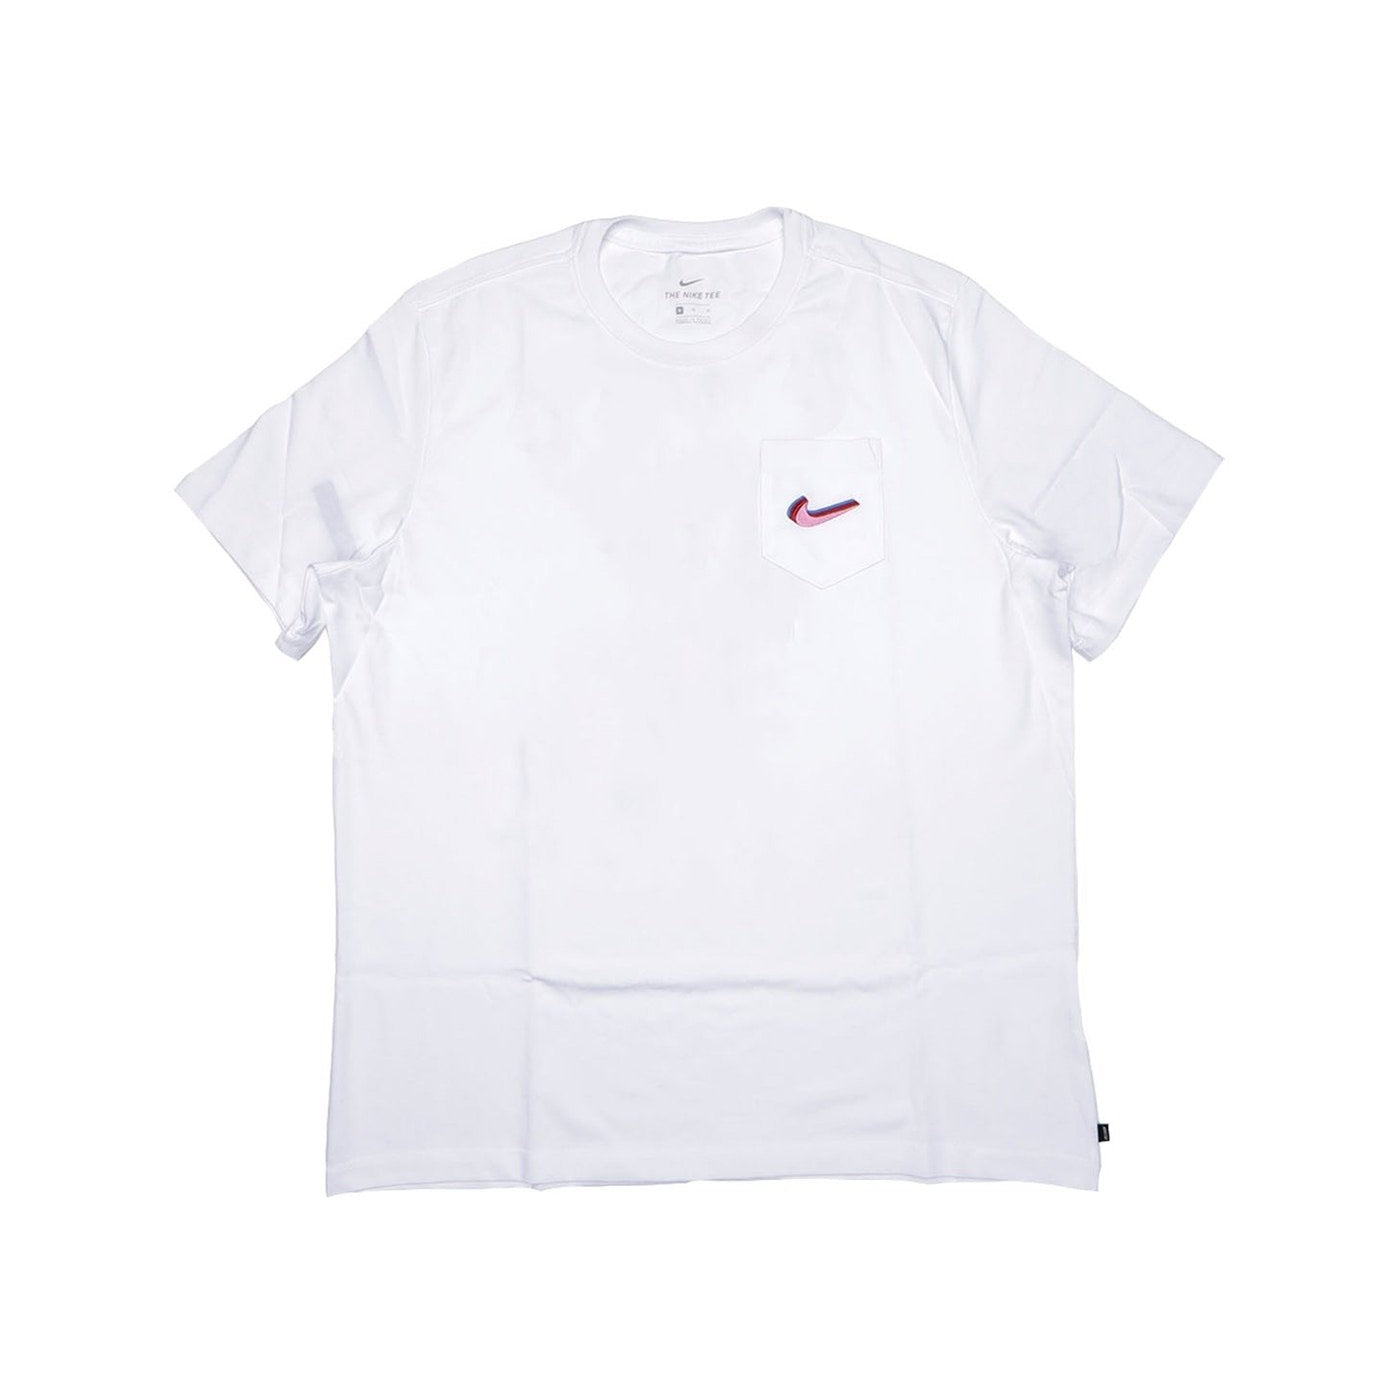 Parra x Nike Tee - Centrall Online